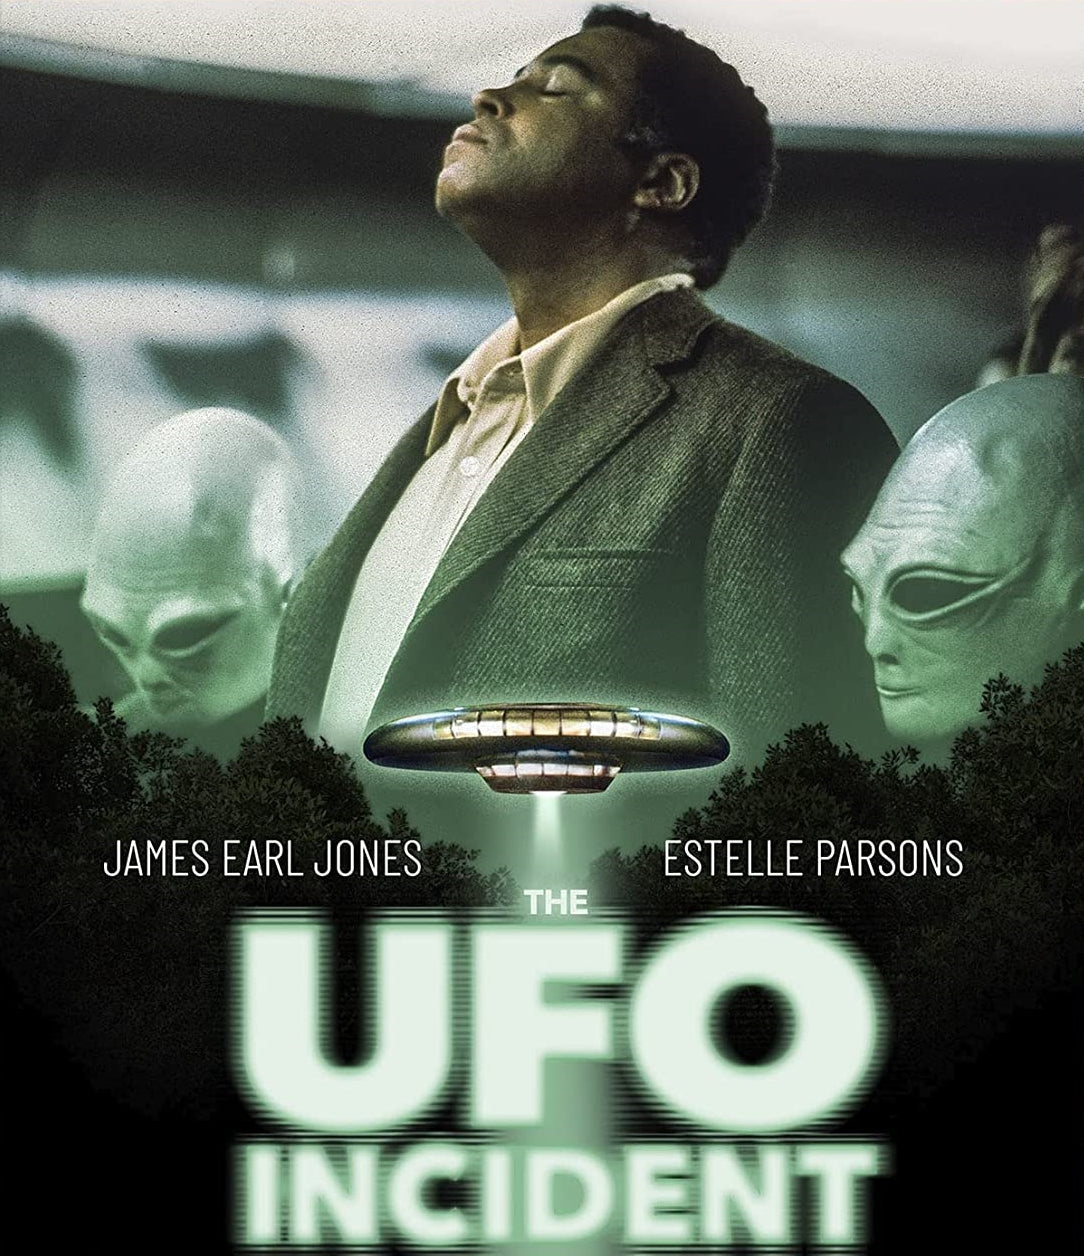 THE UFO INCIDENT BLU-RAY